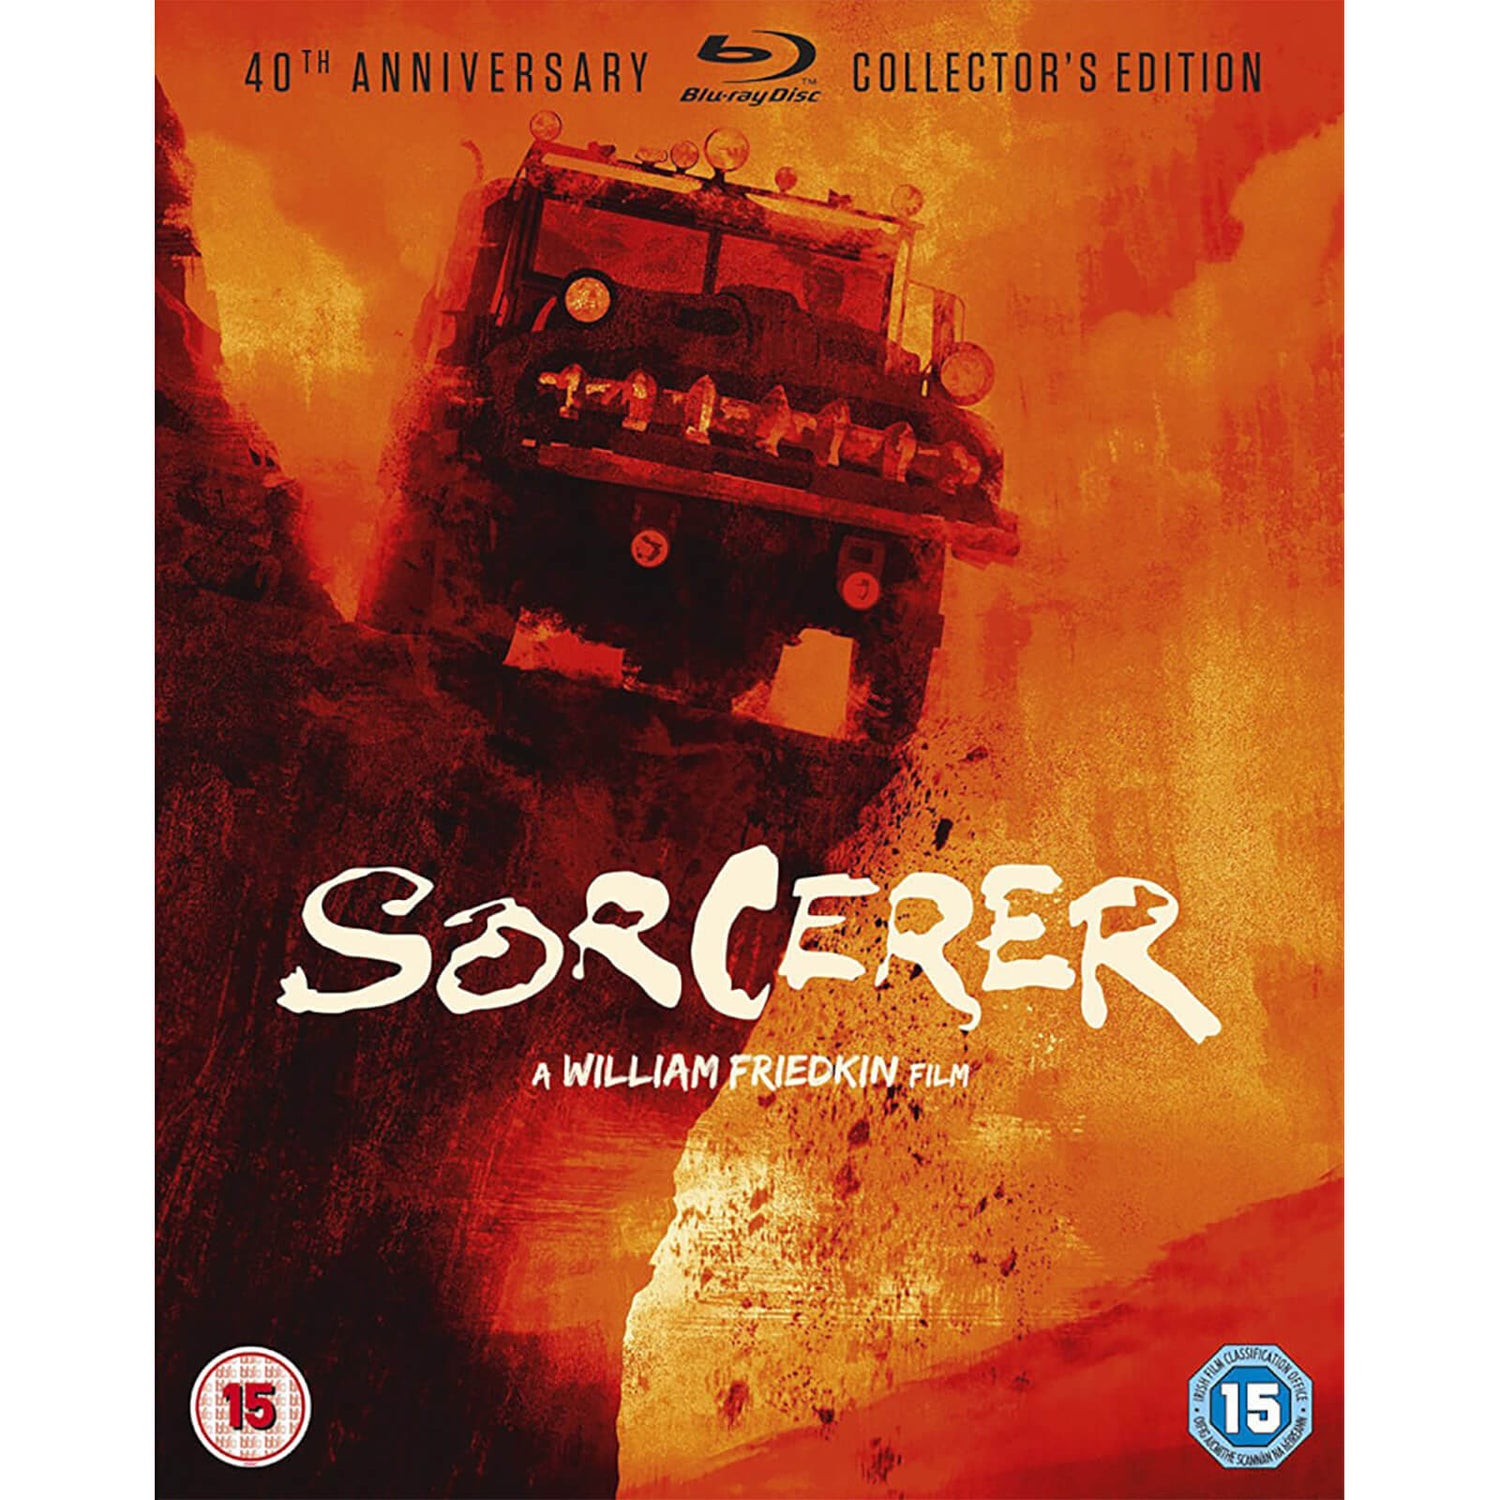 Sorcerer (40th Anniversary Collector's Edition)